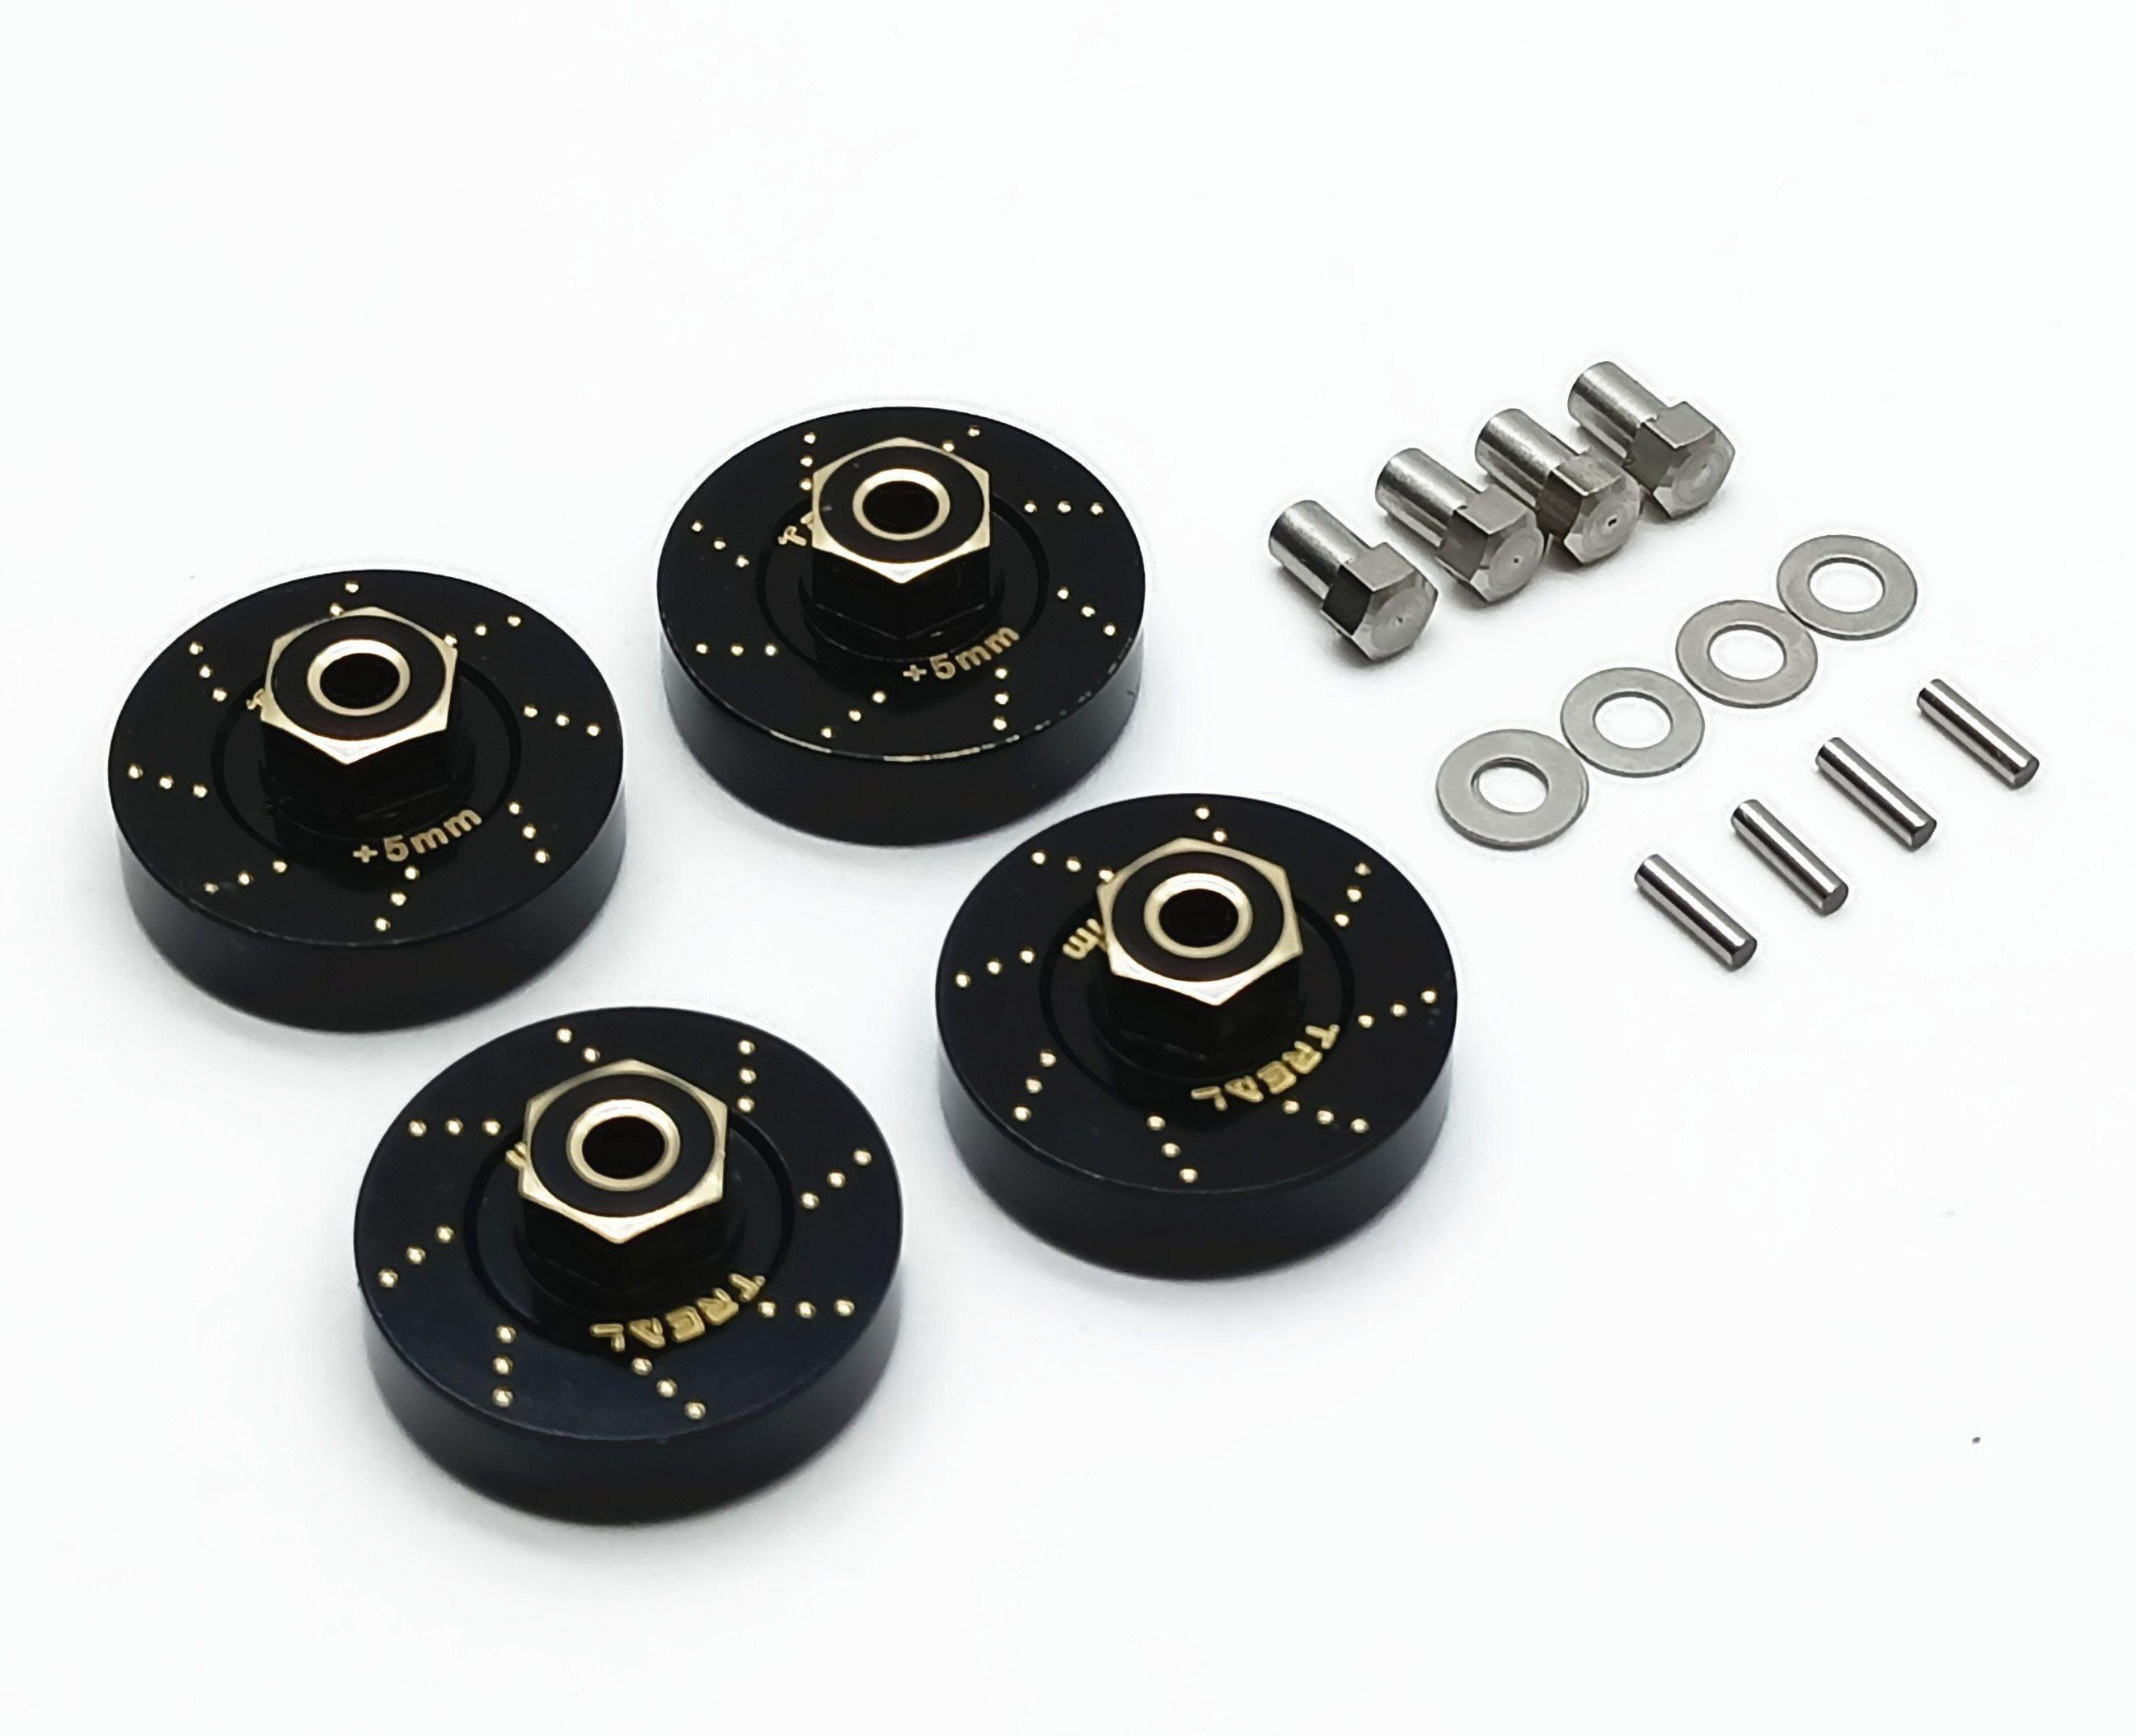 Treal Brass Extended Wheel Hubs (4p) +5mm Axle Counter Weight 12g for Axial SCX24 -Black ...